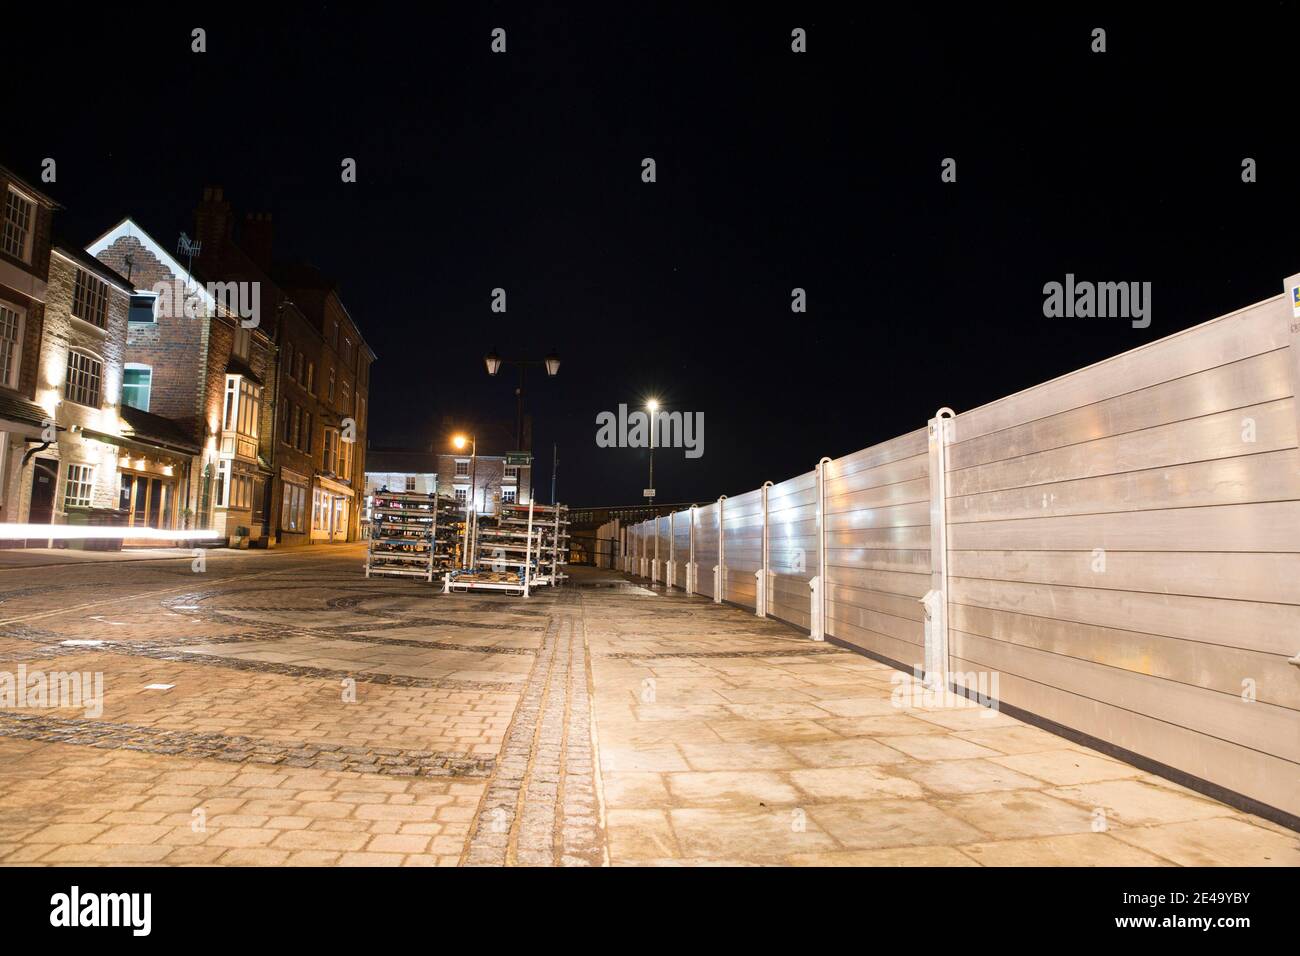 Flood barriers installed in Bewdley beacause of storm Christoph. A photograph taken at night with property fronts lit up along the river front. Stock Photo